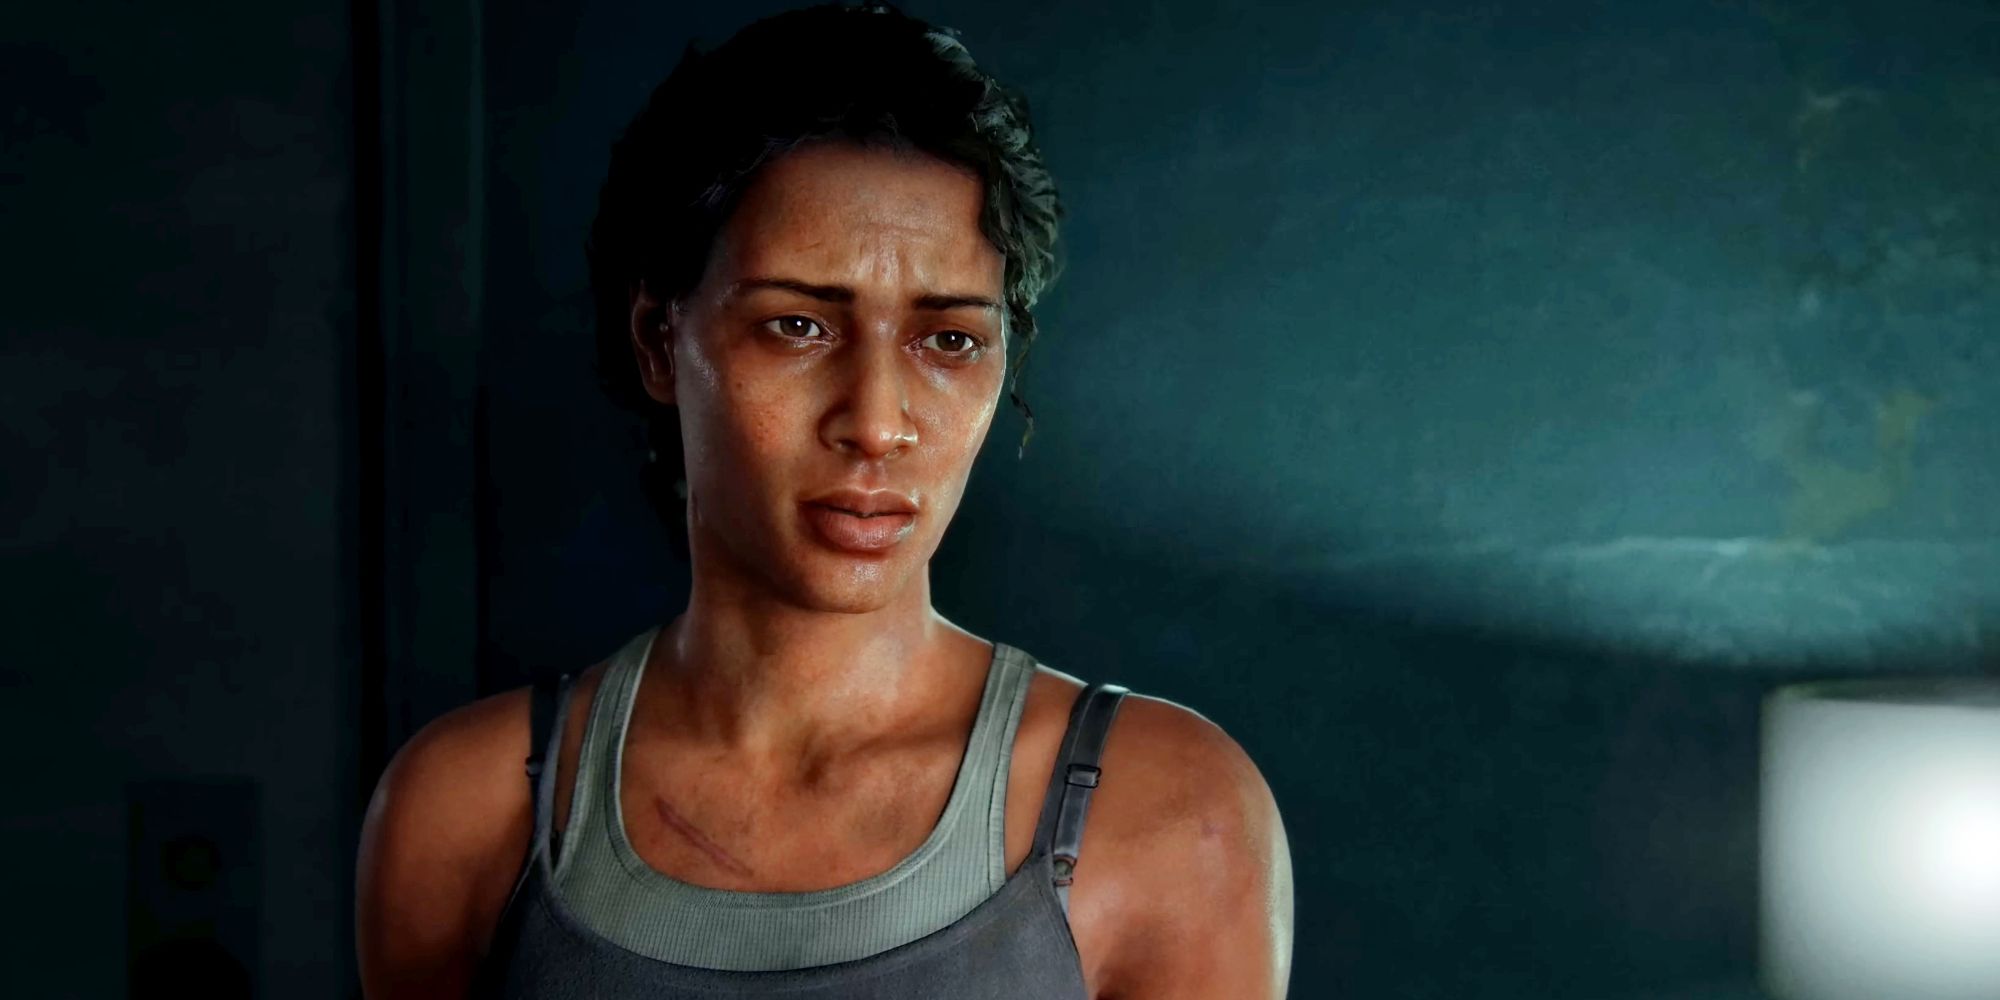 Marlene in The Last of Us Part 1, looking at Joel off screen in a dimly lit hospital room.